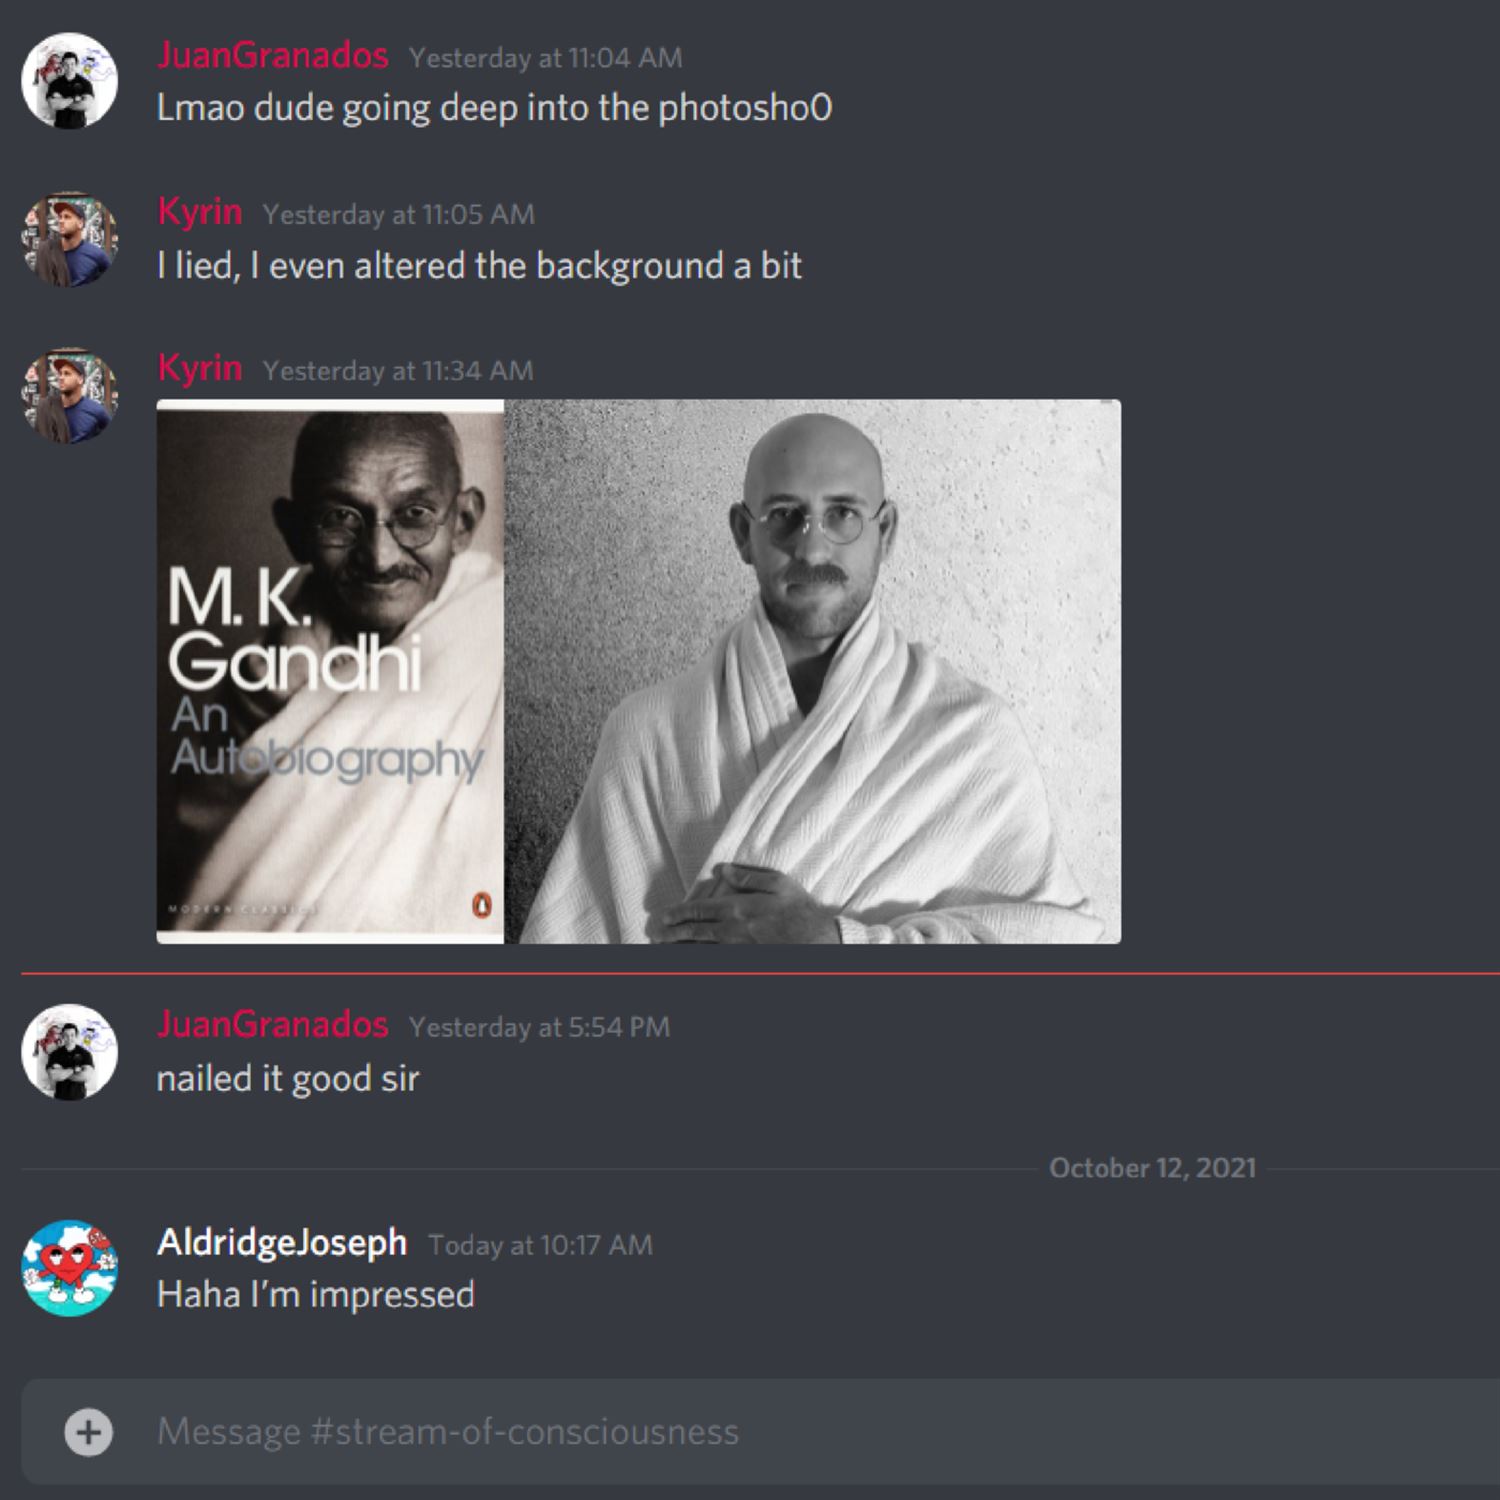 We have a discord